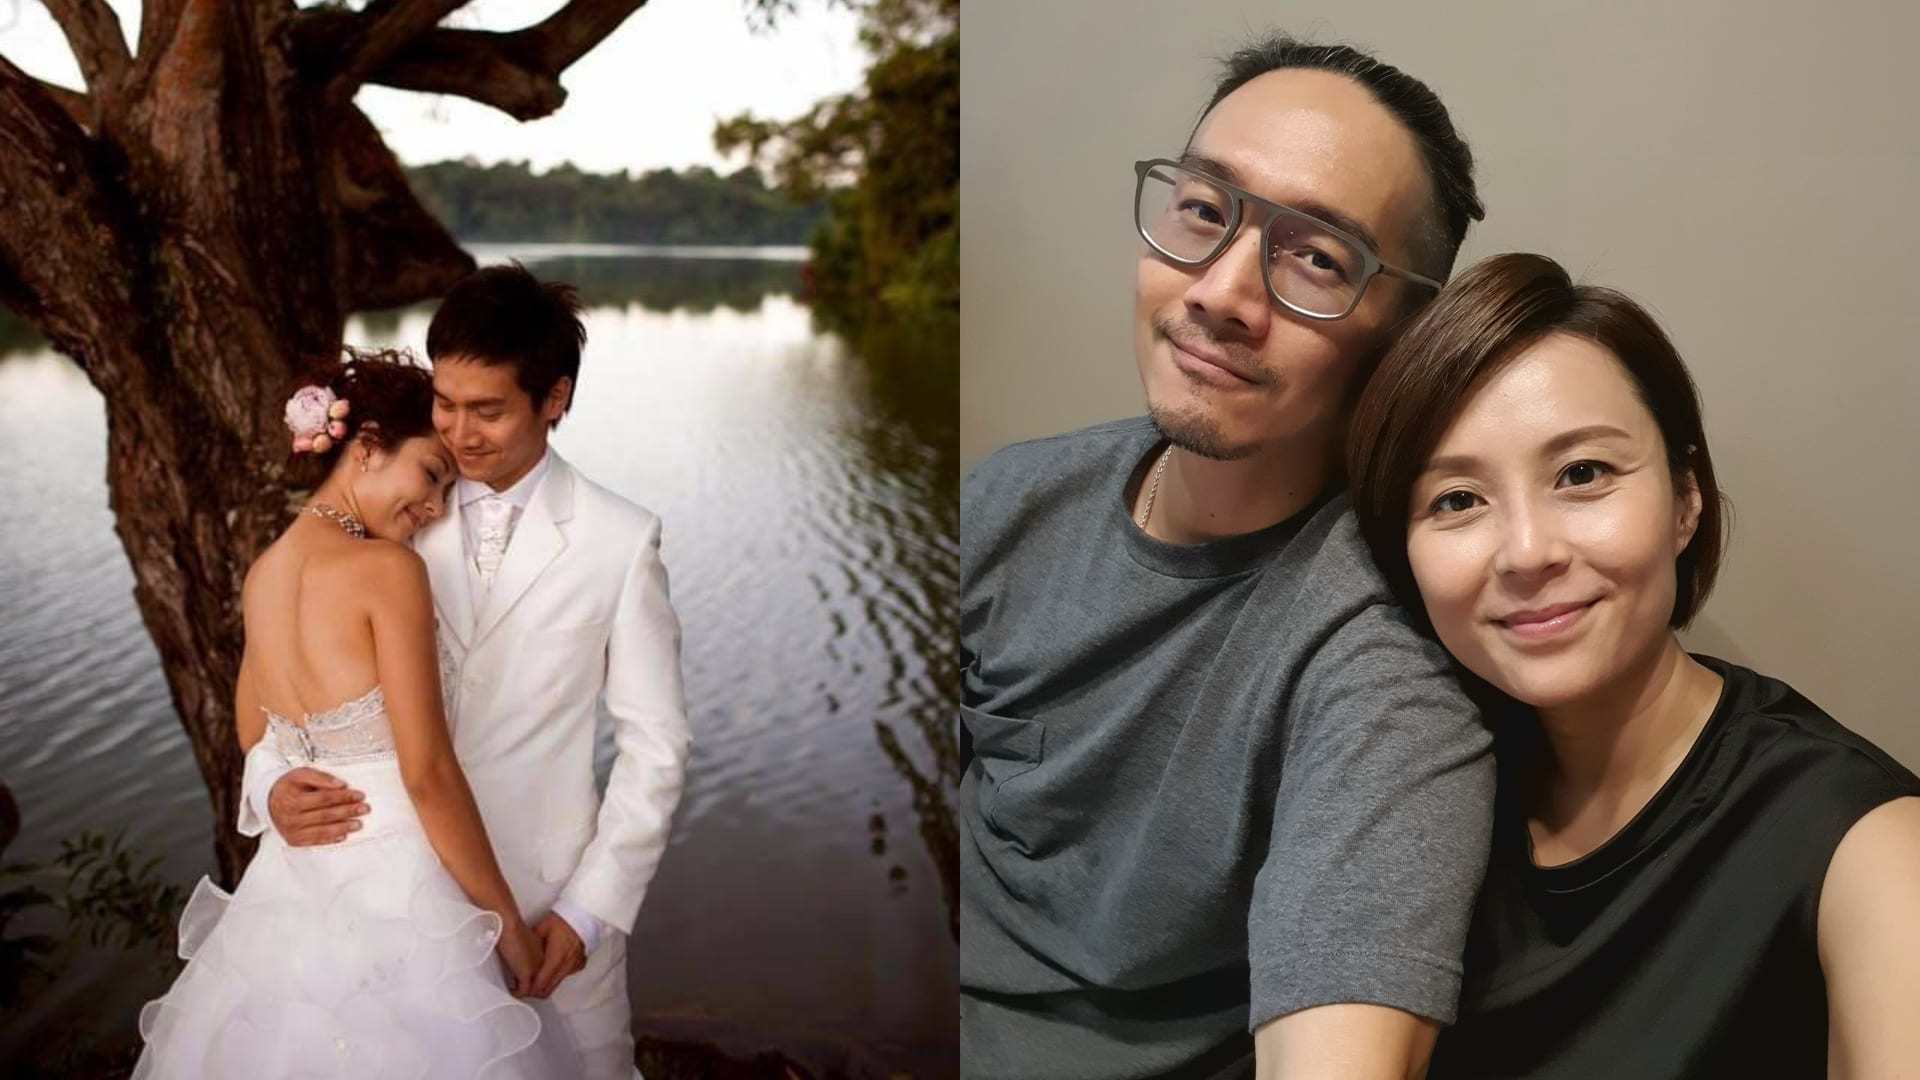 Priscelia Chan Thanks Husband Alan Tern For Getting Her Through The “Darkest Days” Of Her Life On Their 13th Wedding Anniversary